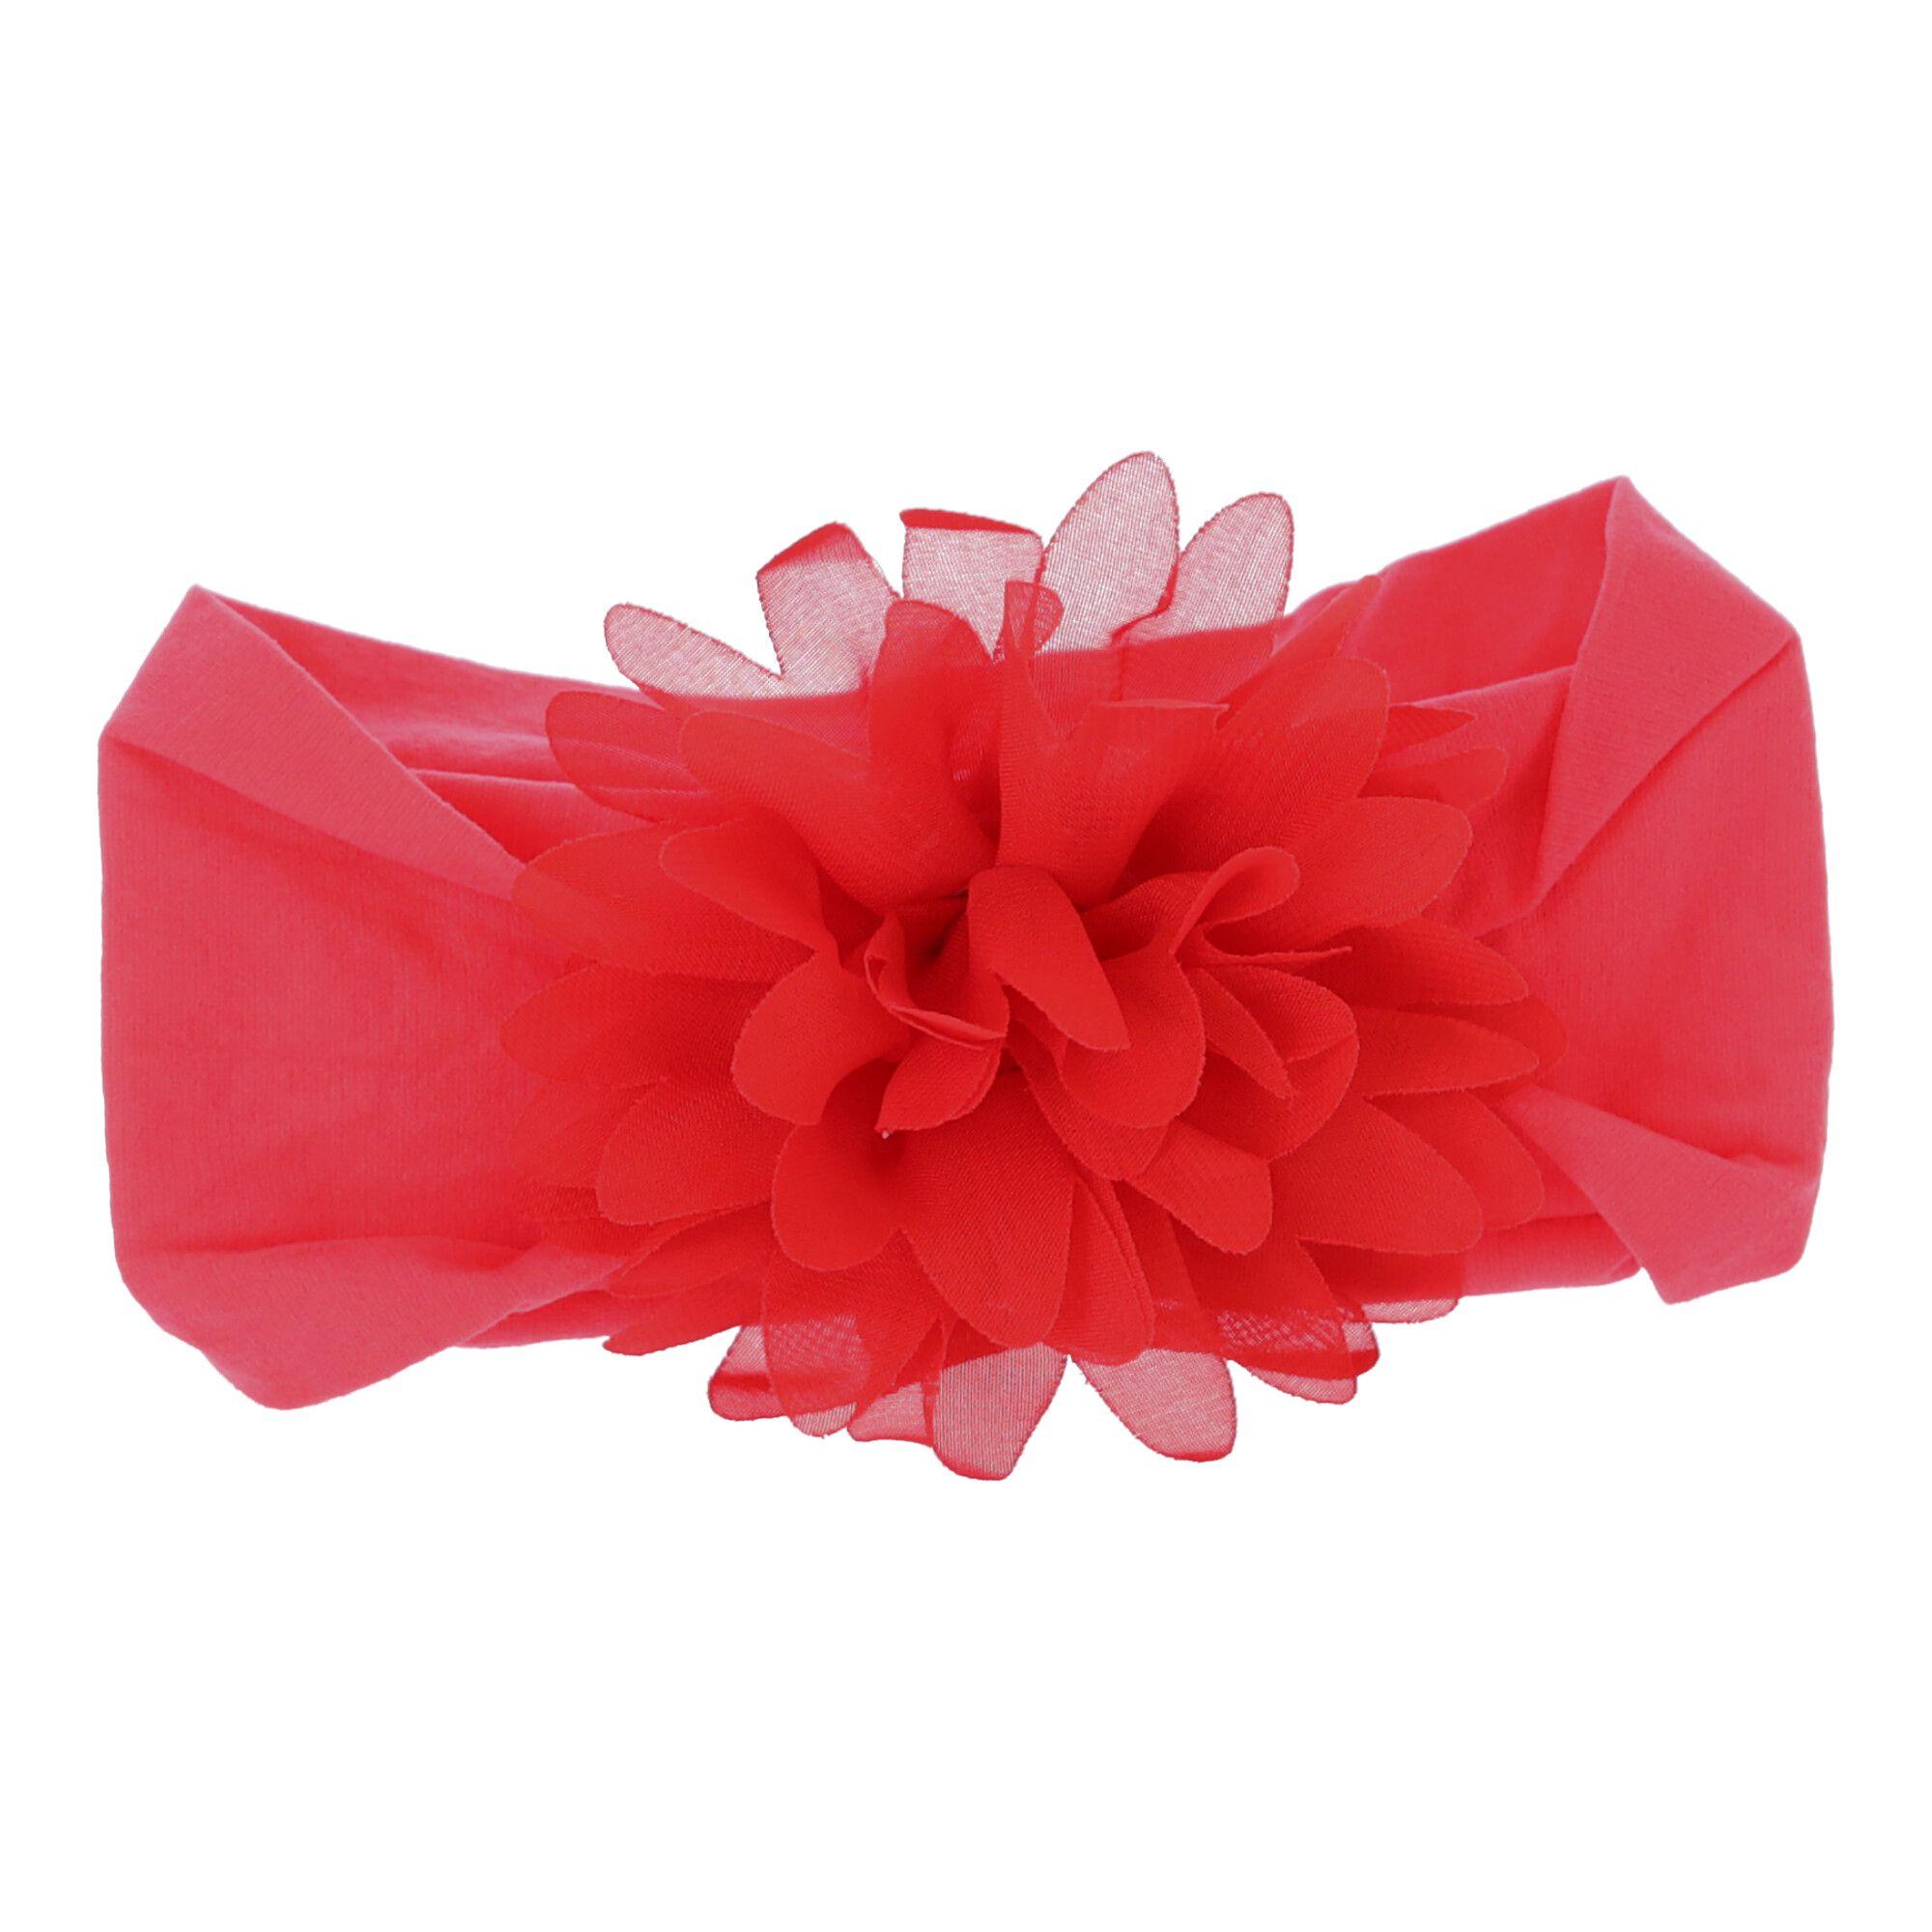 Baby headband with a flower - red, wide